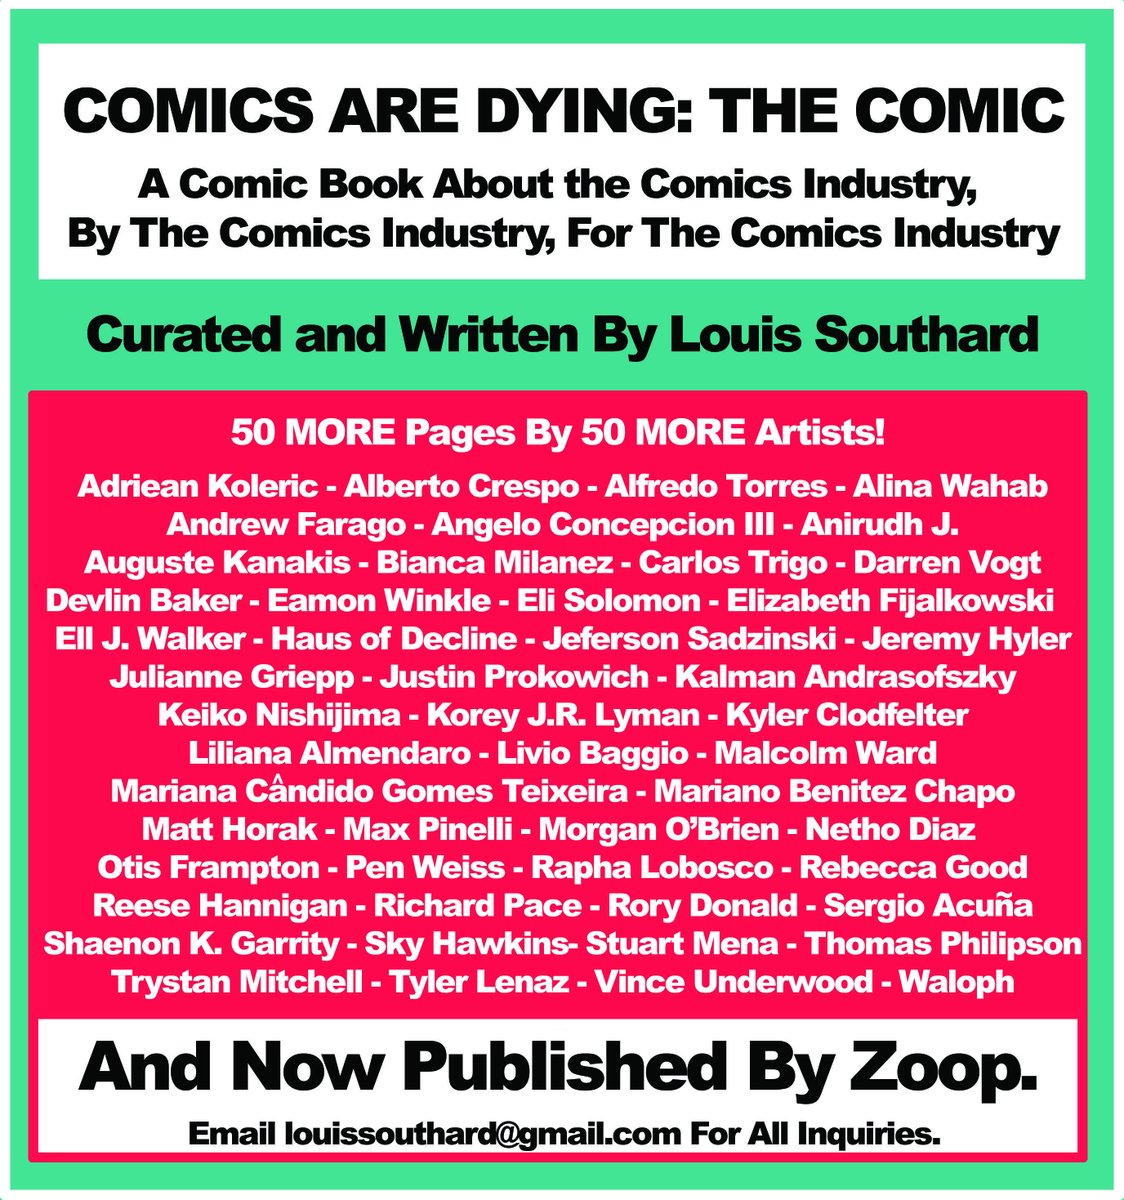 'Comics Are Dying: The Comic' is live on @WeAreZoop! It's a satirical journey through the history of the comic book industry recounted by 100 one-page comics by 1 writer and 100 artists. 
I drew on of the pages in the book, Luna Lunar! #ComicsAreDying zoop.gg/c/comicsaredyi…